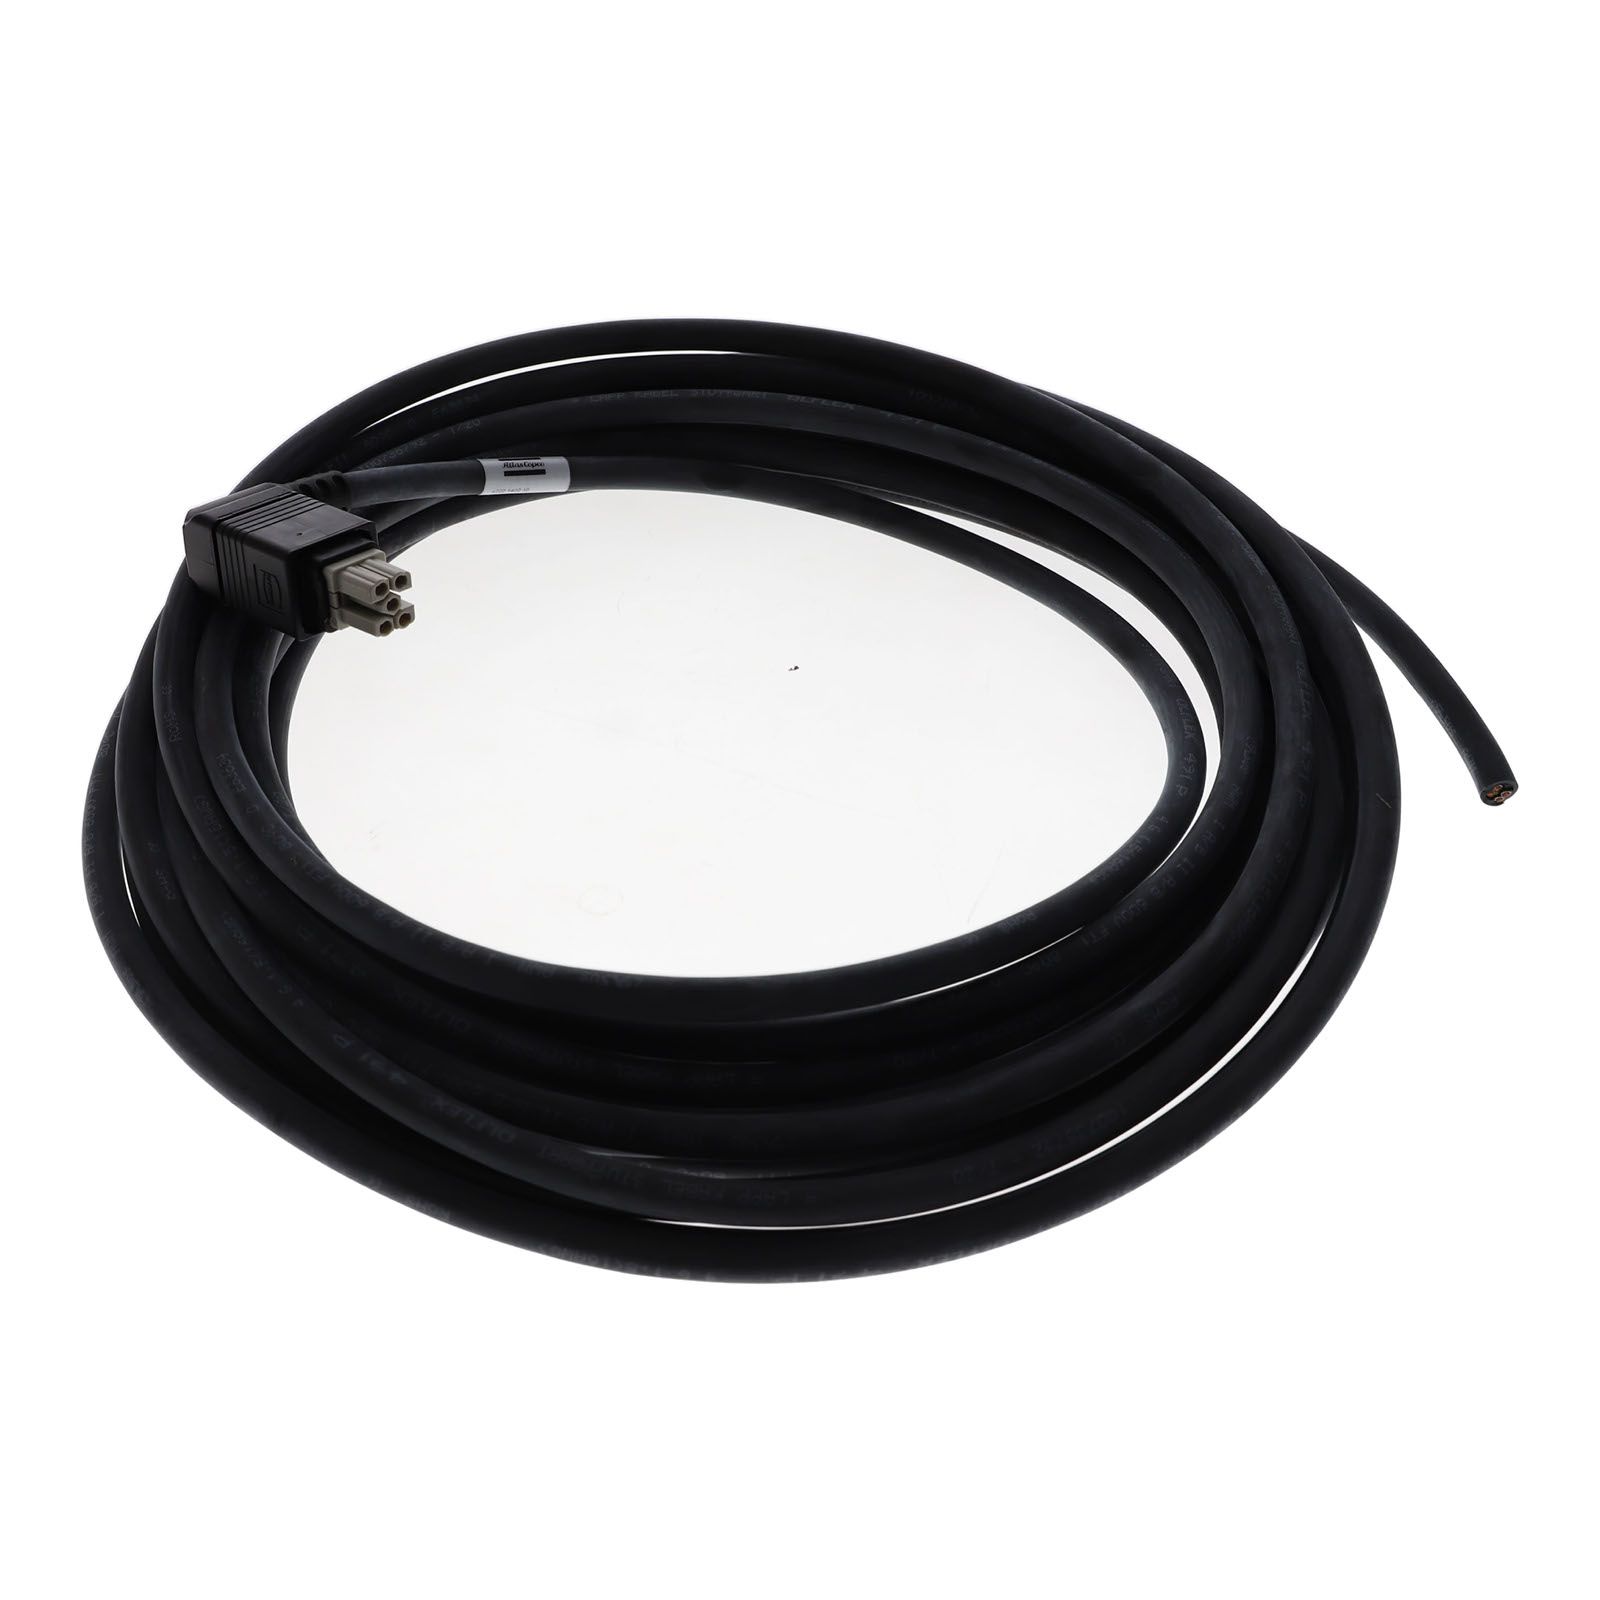 CABLE 10M productfoto